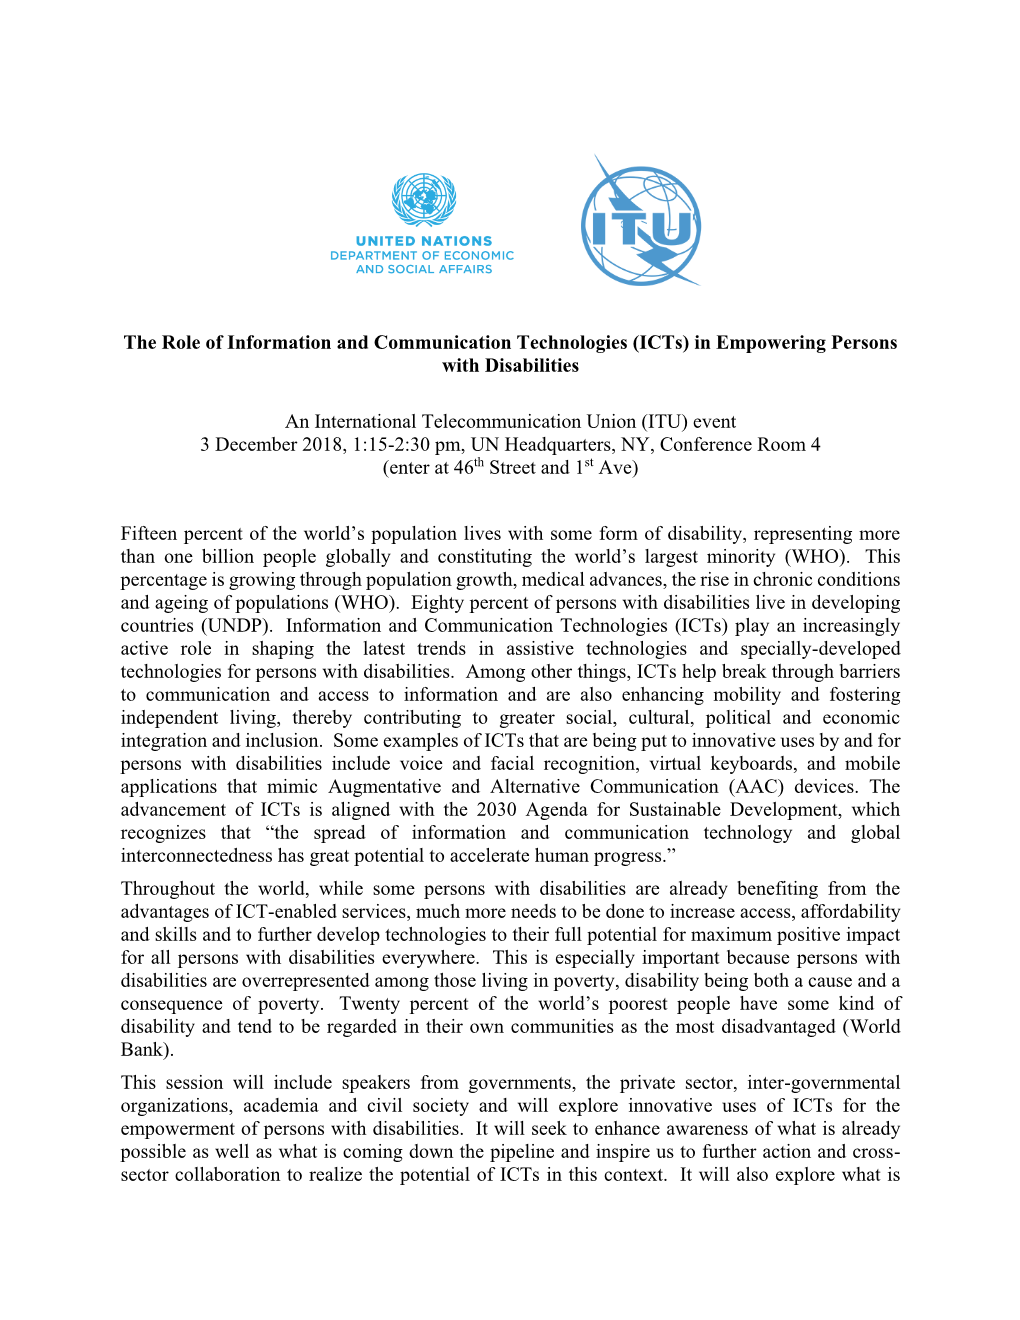 The Role of Information and Communication Technologies (Icts) in Empowering Persons with Disabilities